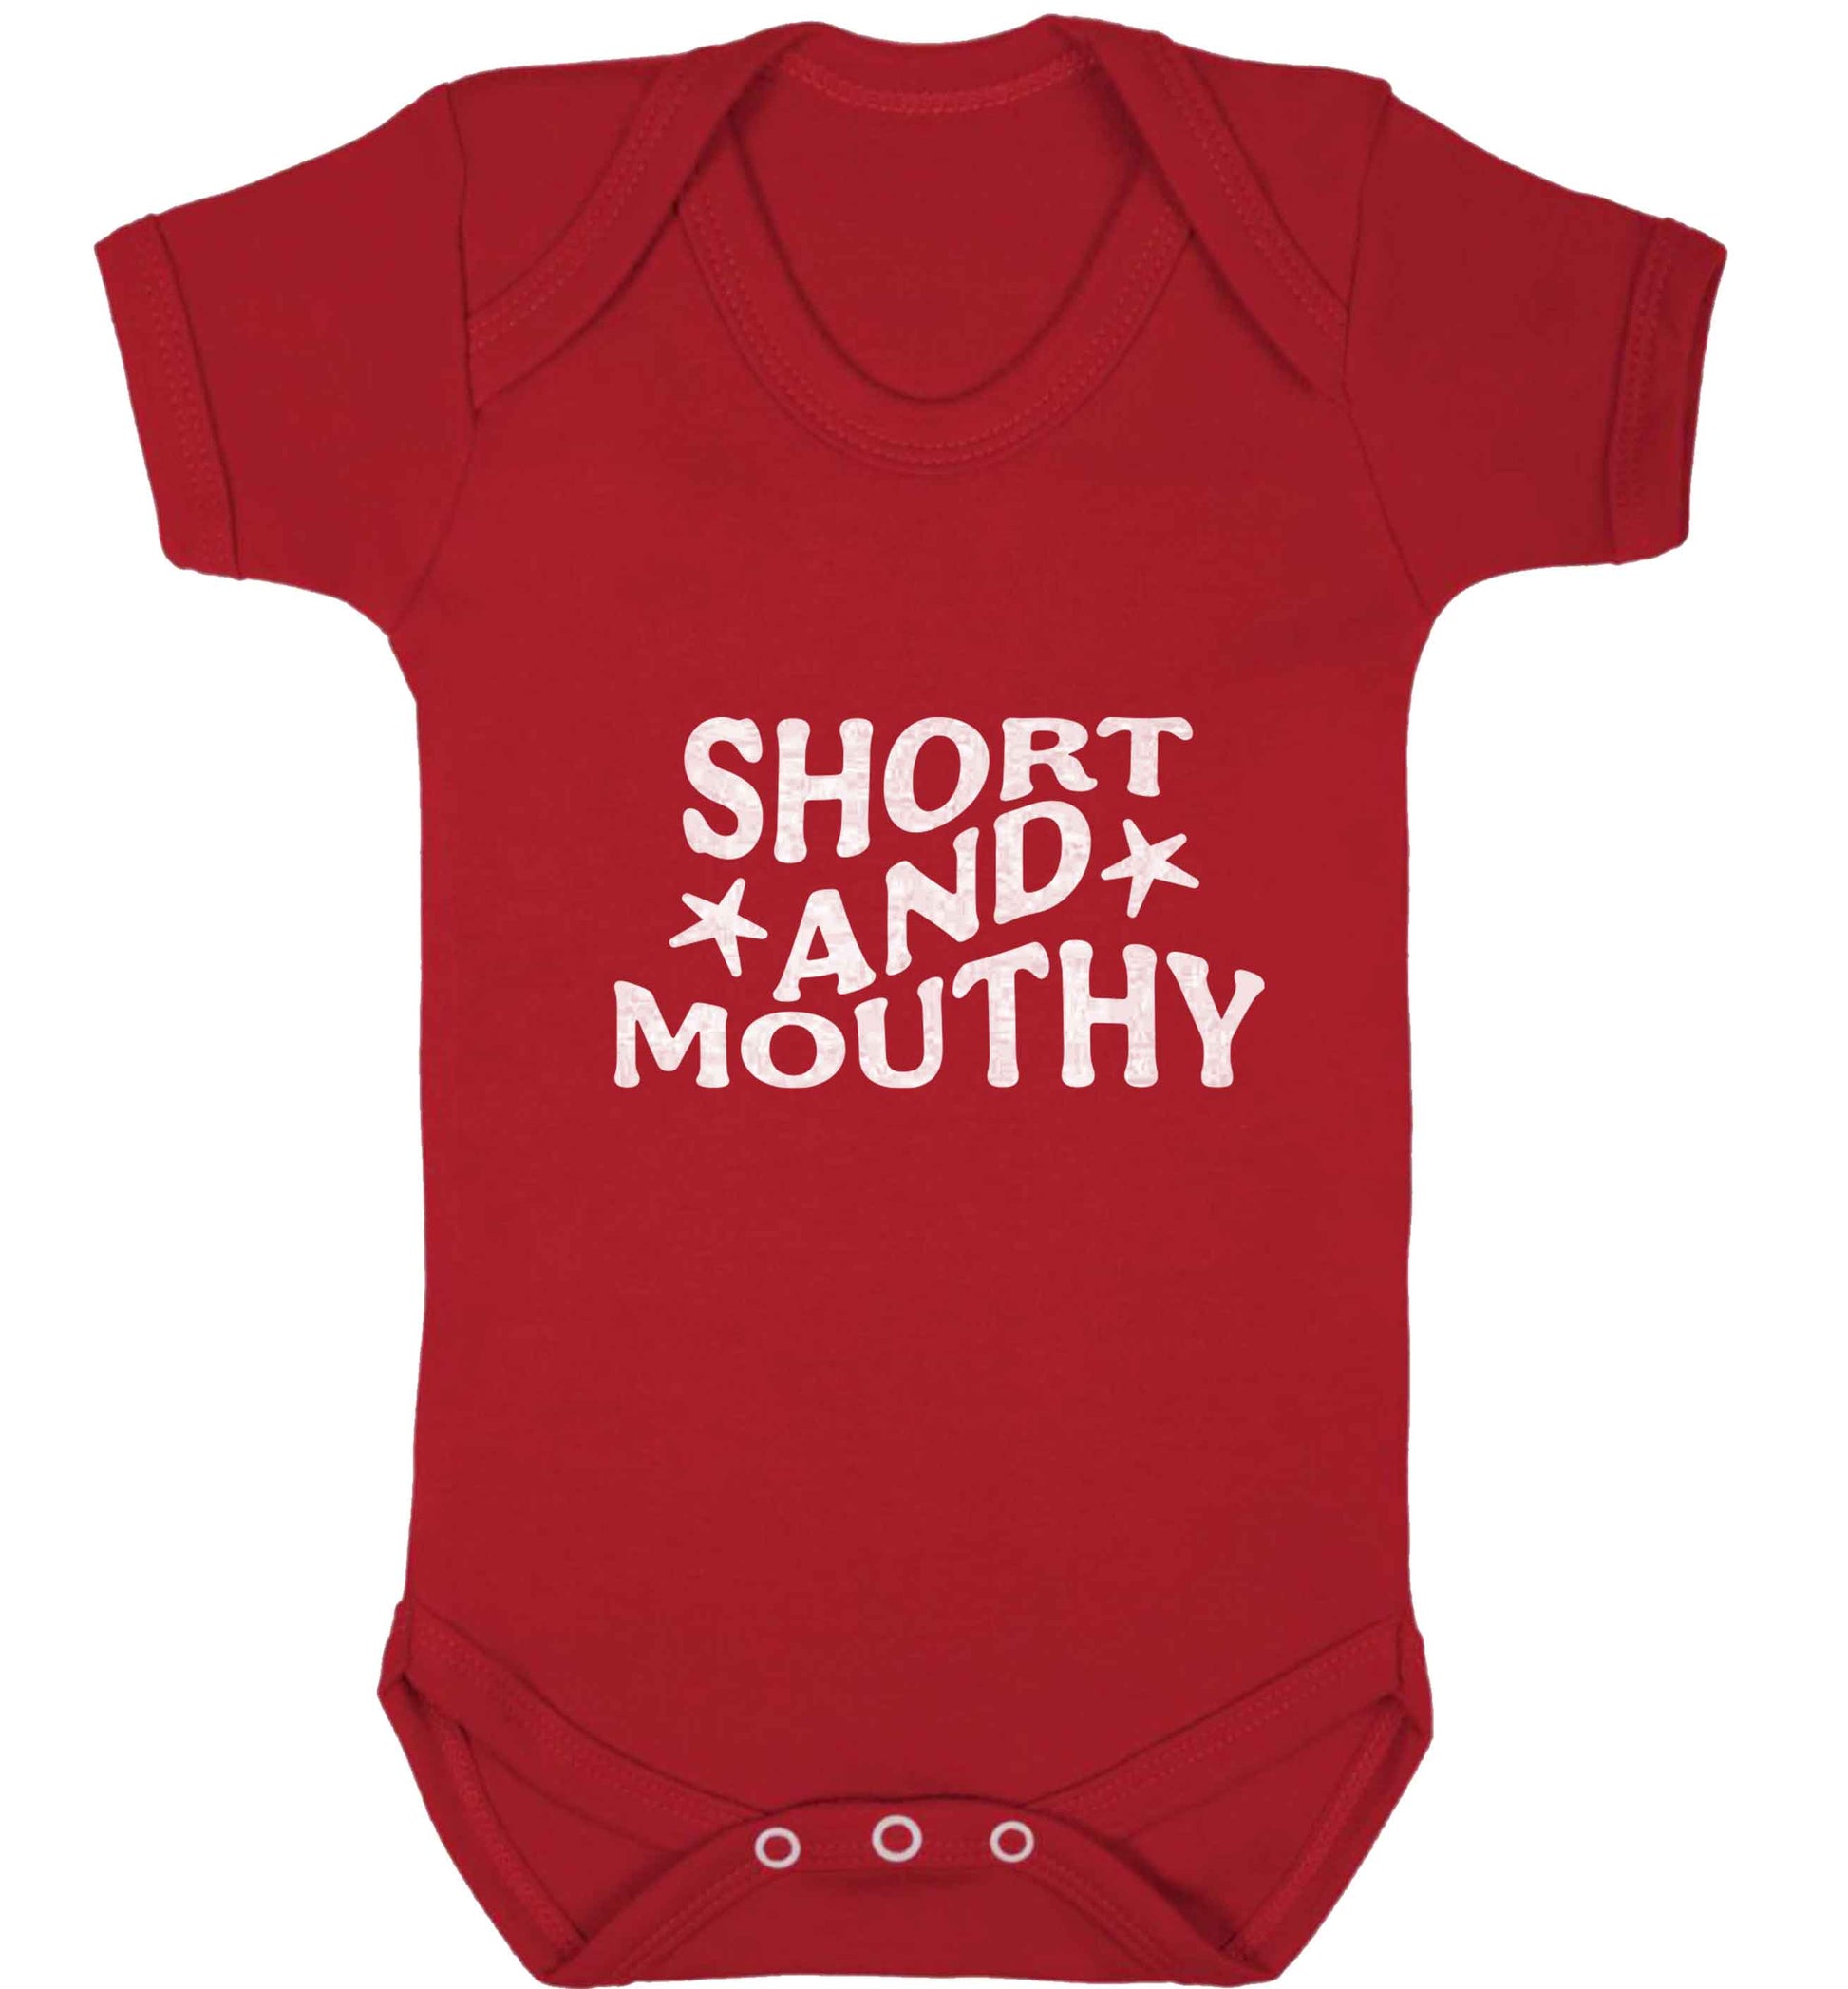 Short and mouthy baby vest red 18-24 months